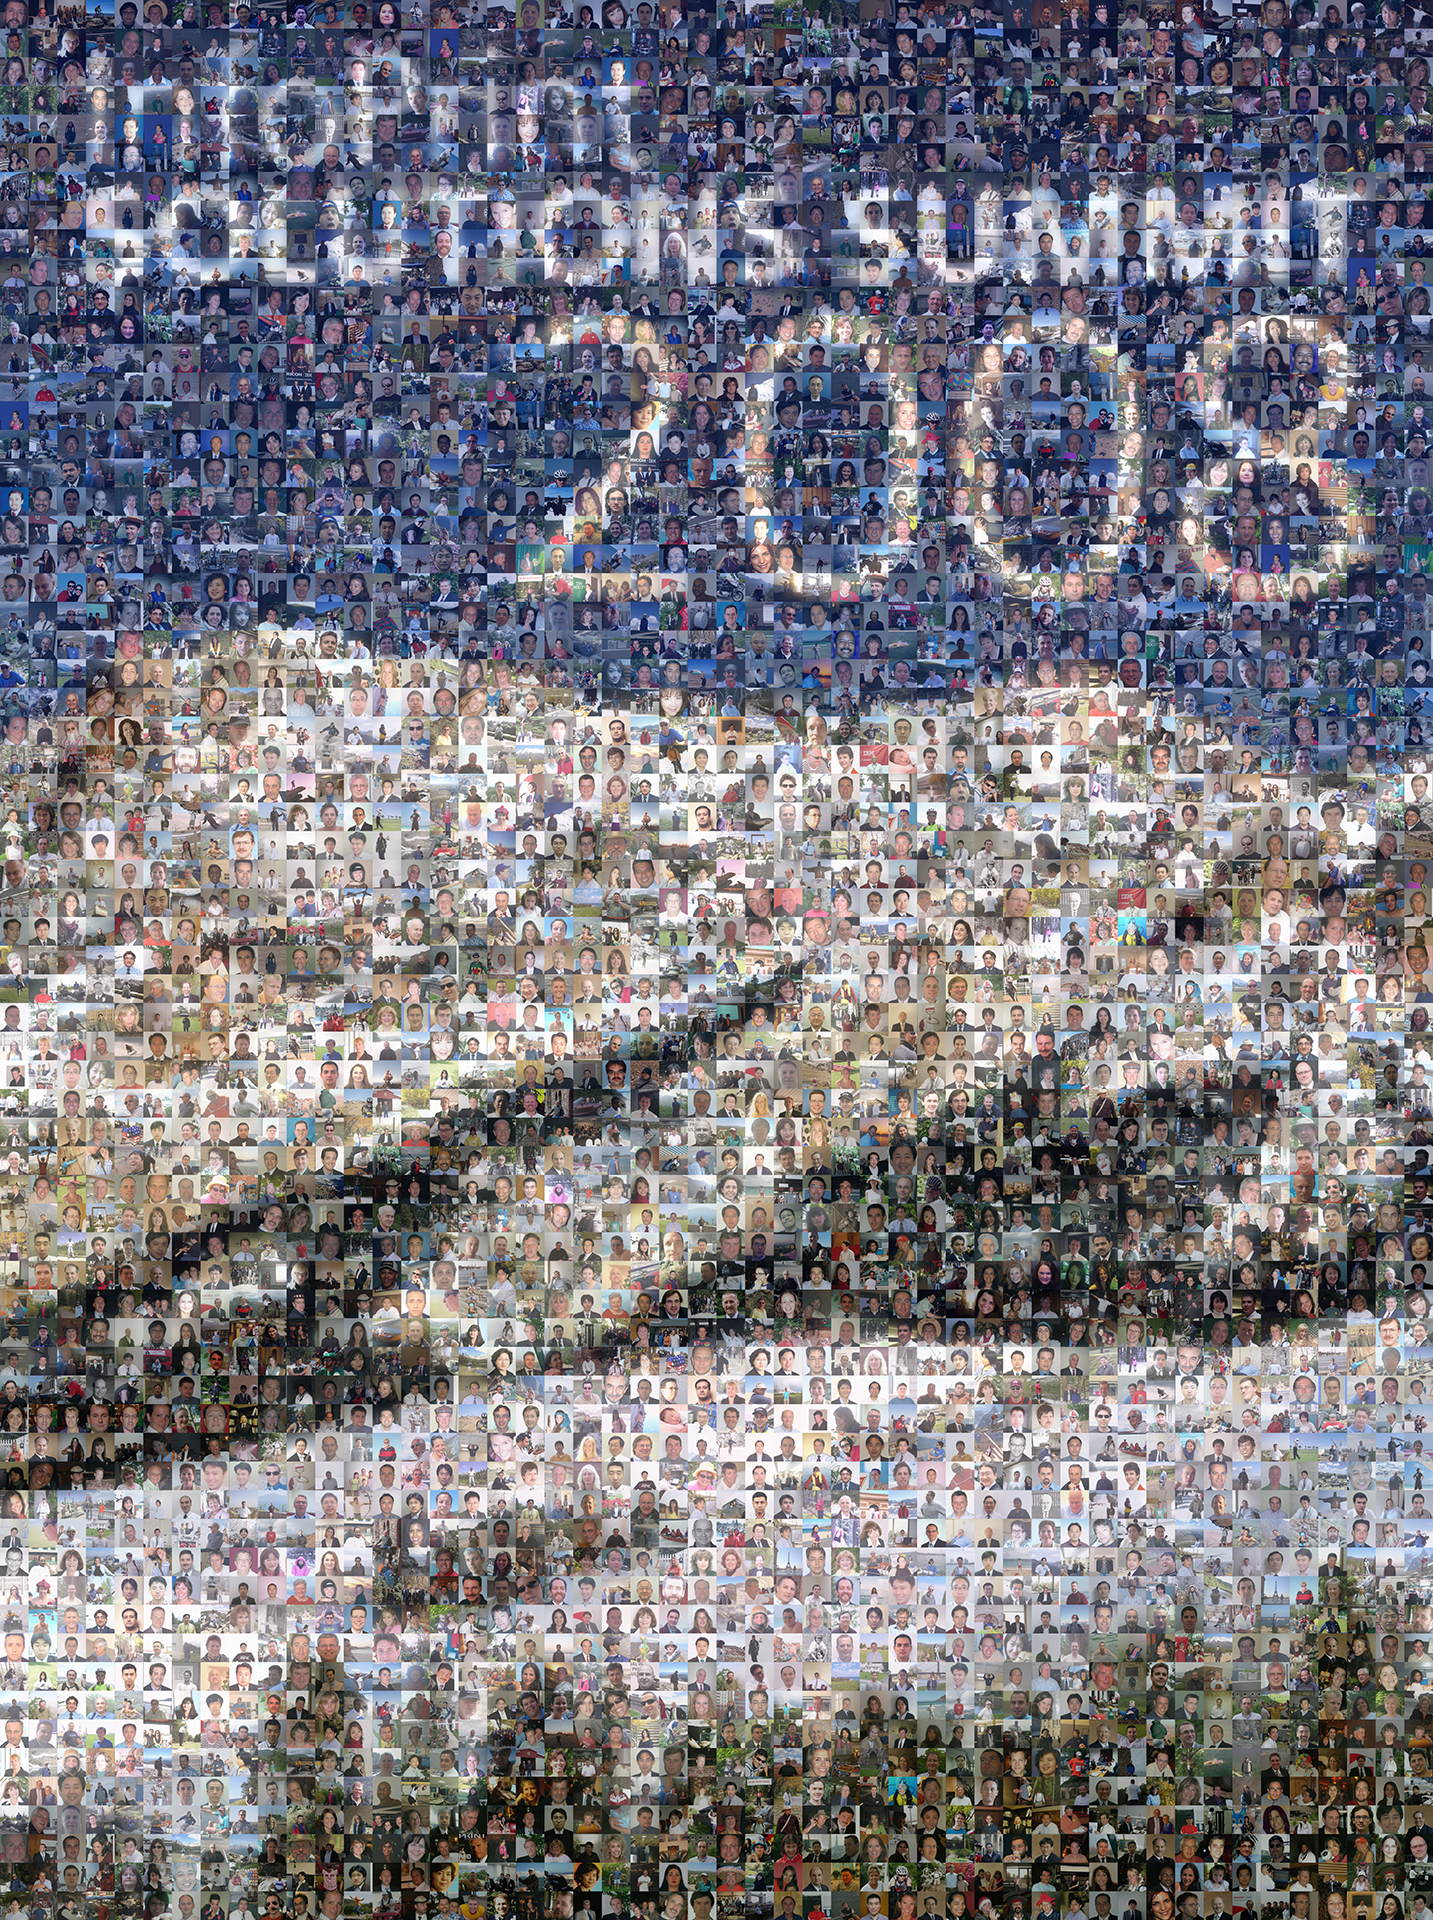 photo mosaic 18' x 24' poster created using over 1600 employee submitted photos